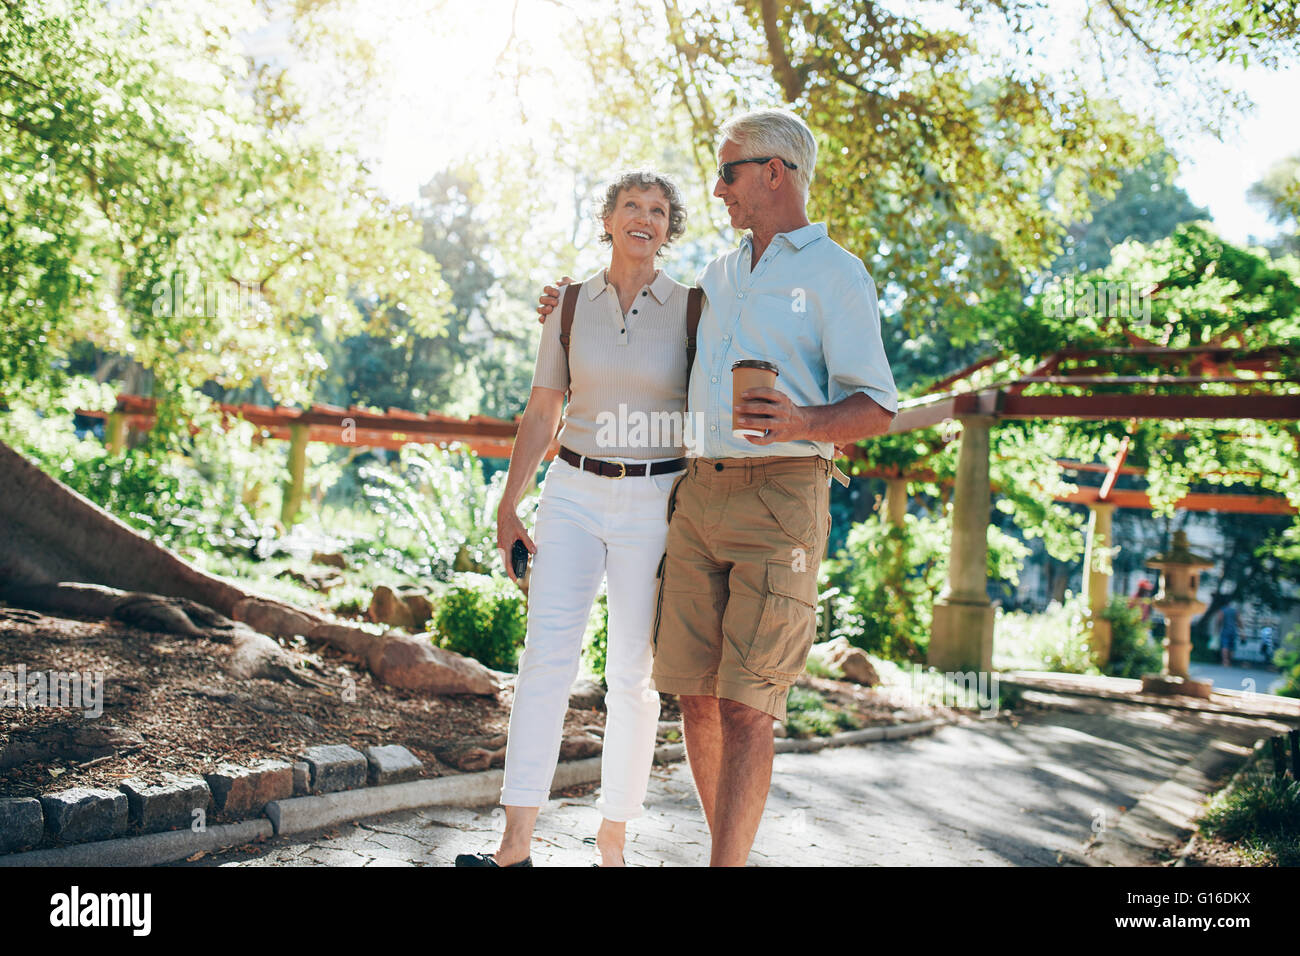 Full length portrait of an loving senior couple enjoying a walk in the park together. Tourist walking in a park. Stock Photo